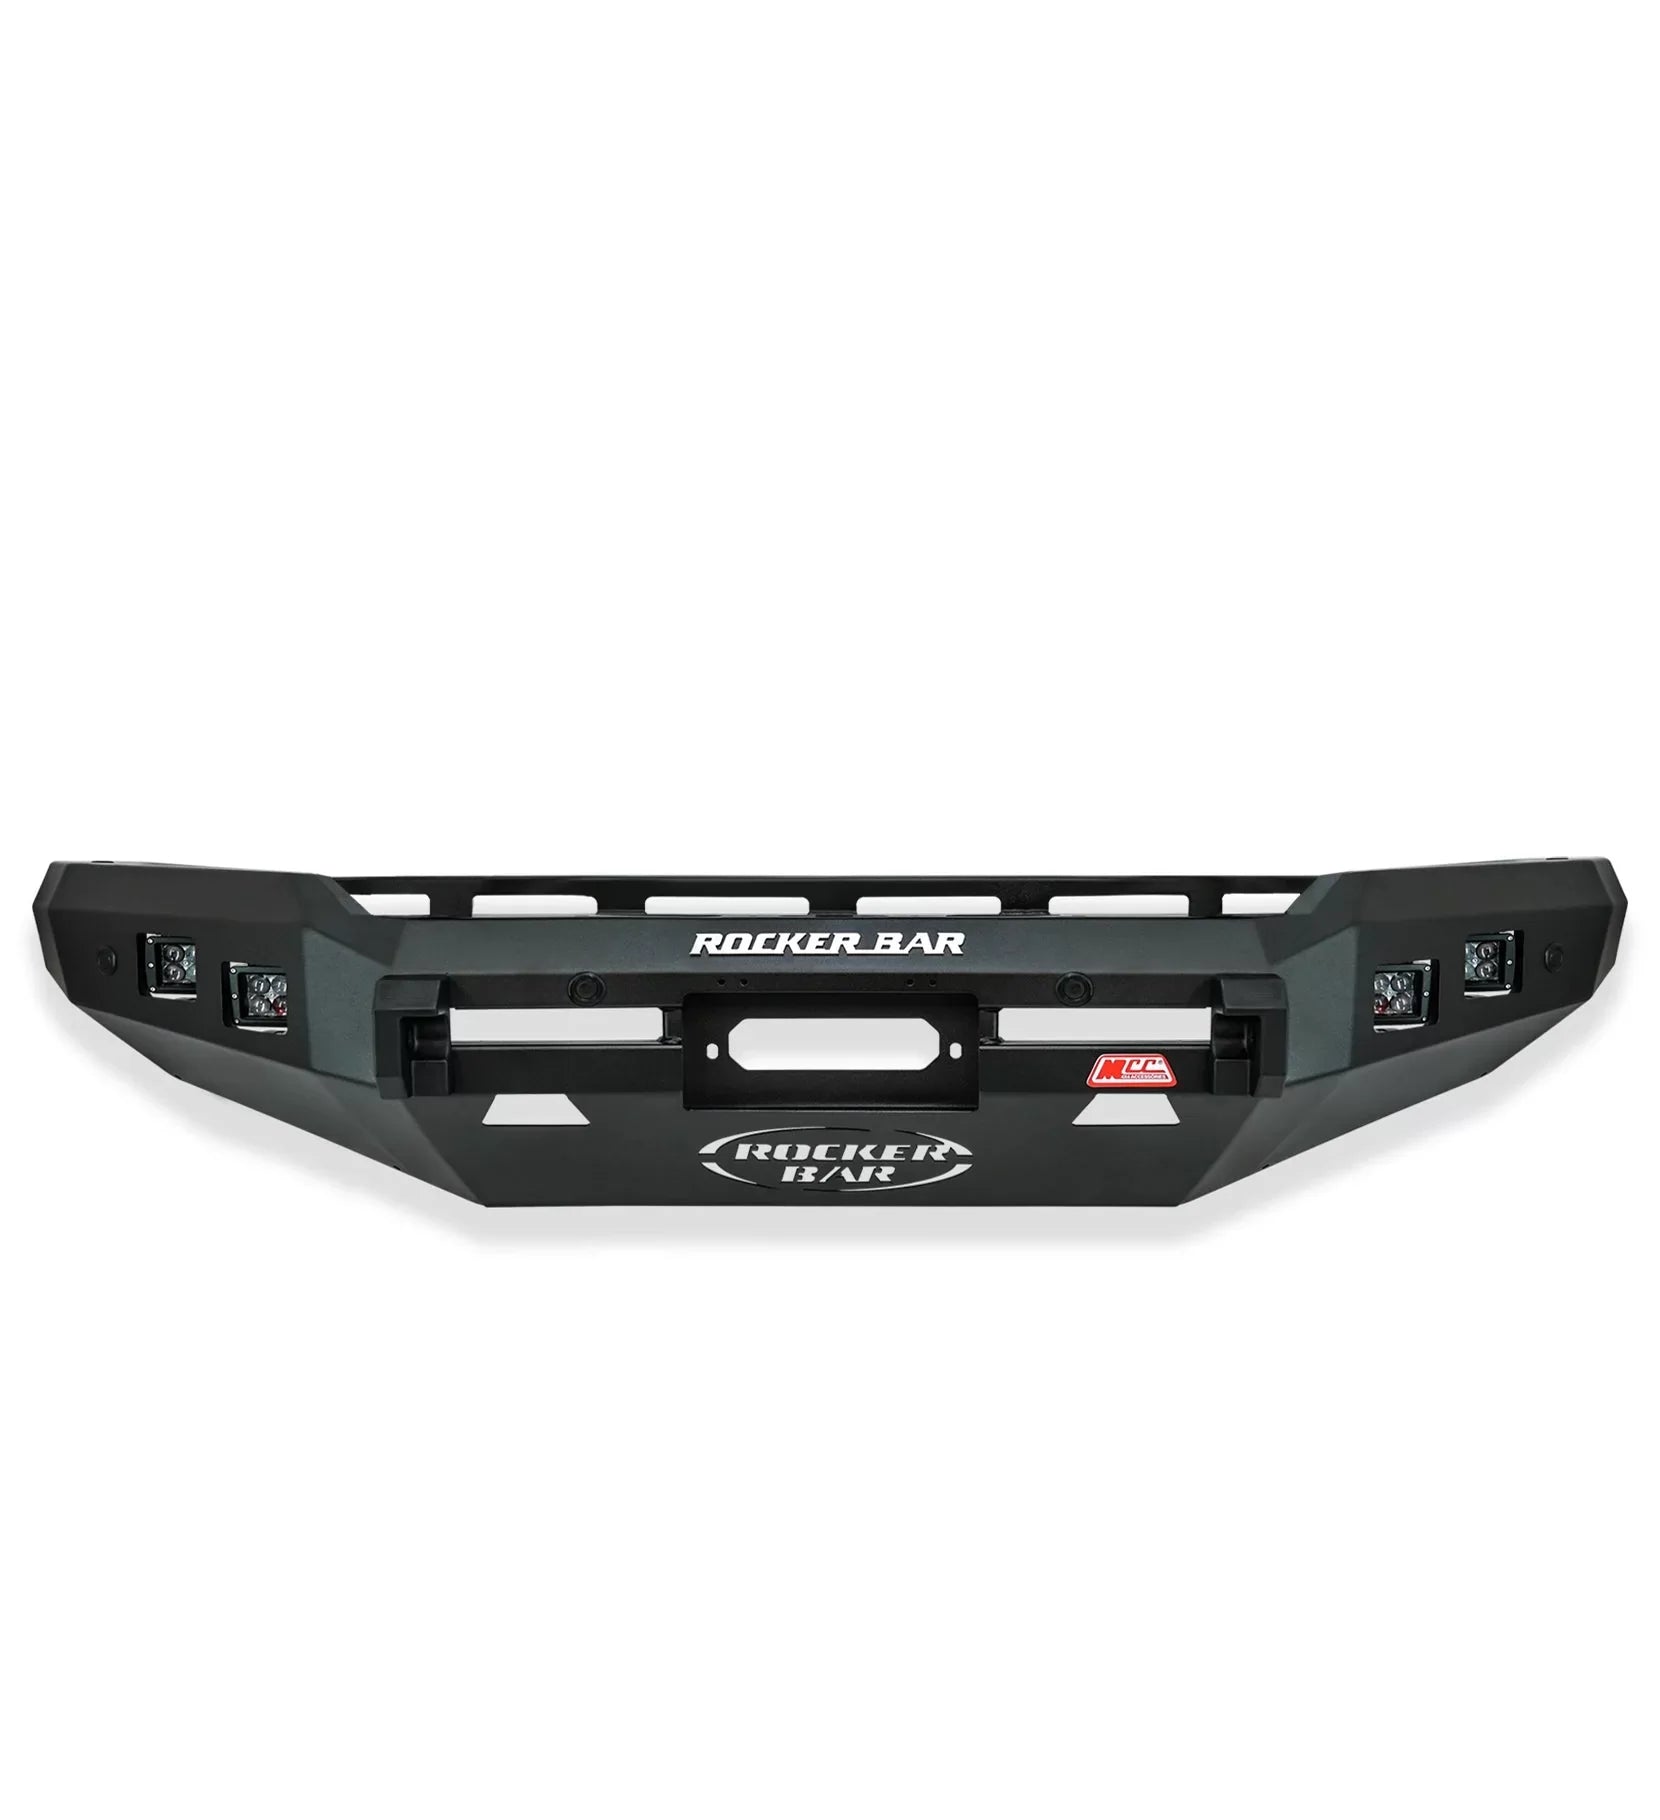 Ranger Pk 09-11 078-01sq Rocker Front Bar Square Light No Loop + Bracket + Underprotection Plate If Available